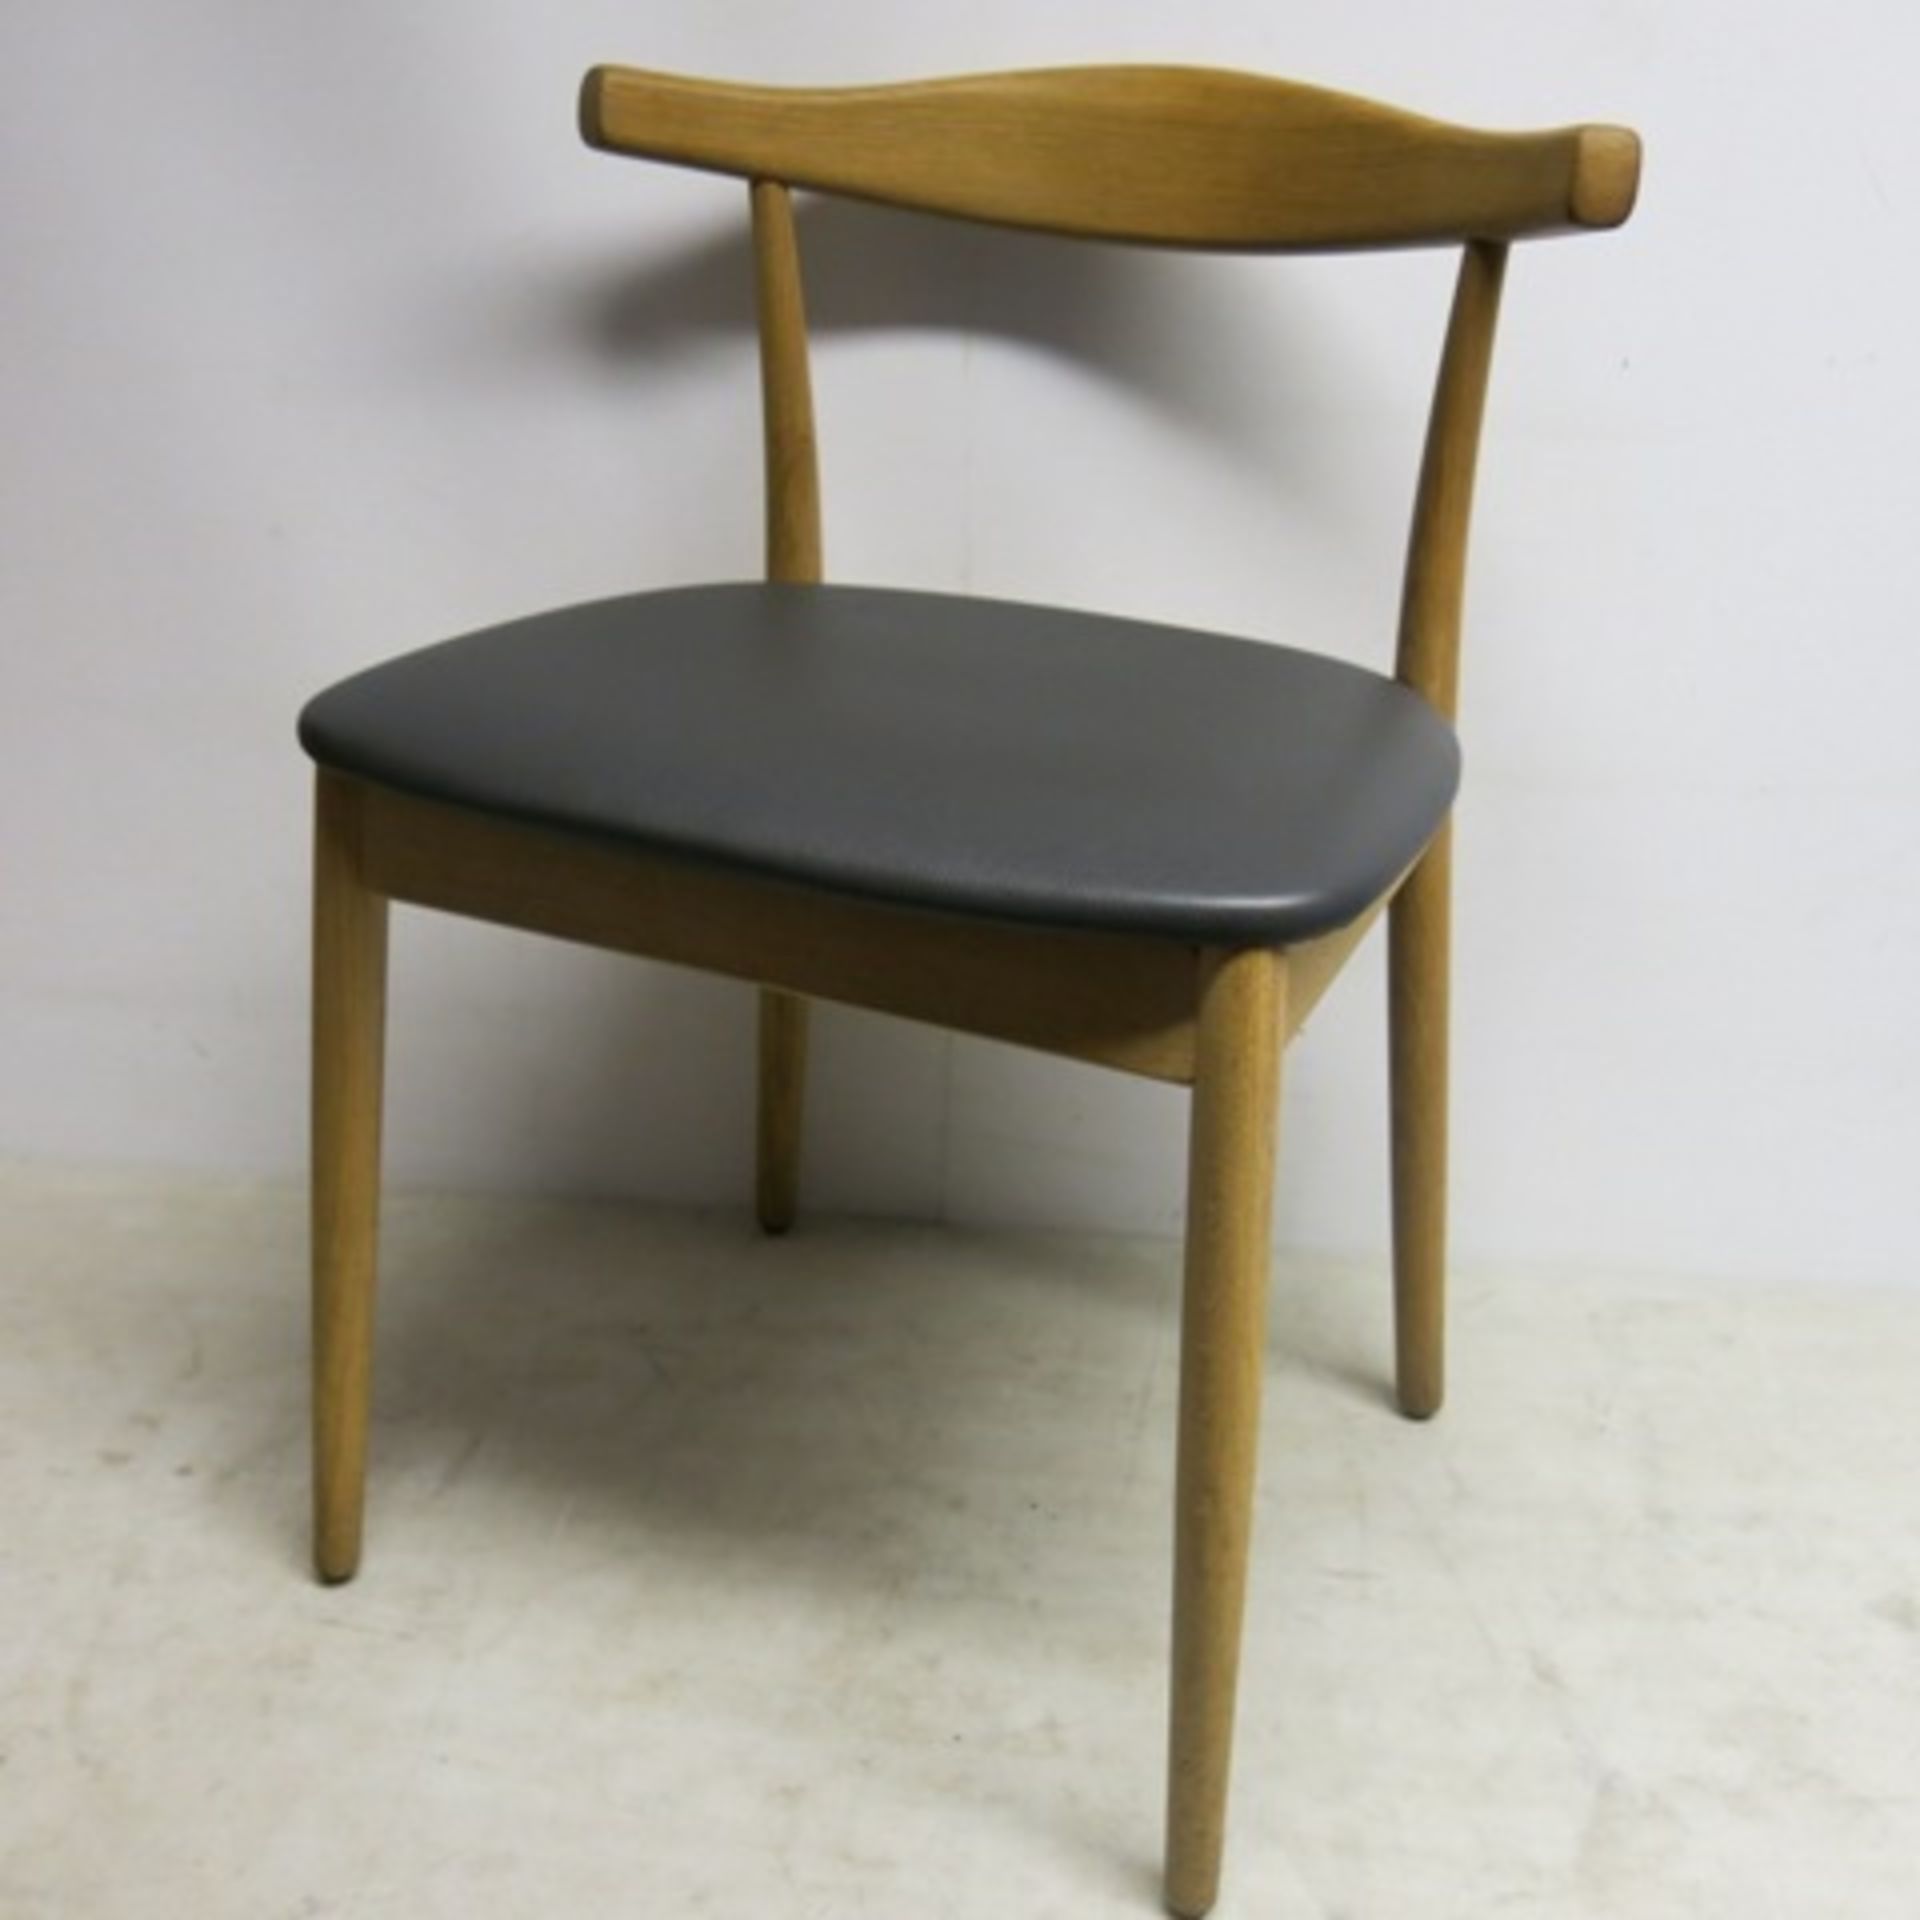 4 x Designer Style, Solid Light Oak Dining Chairs with Grey Faux Leather Padded Seat. - Image 3 of 7